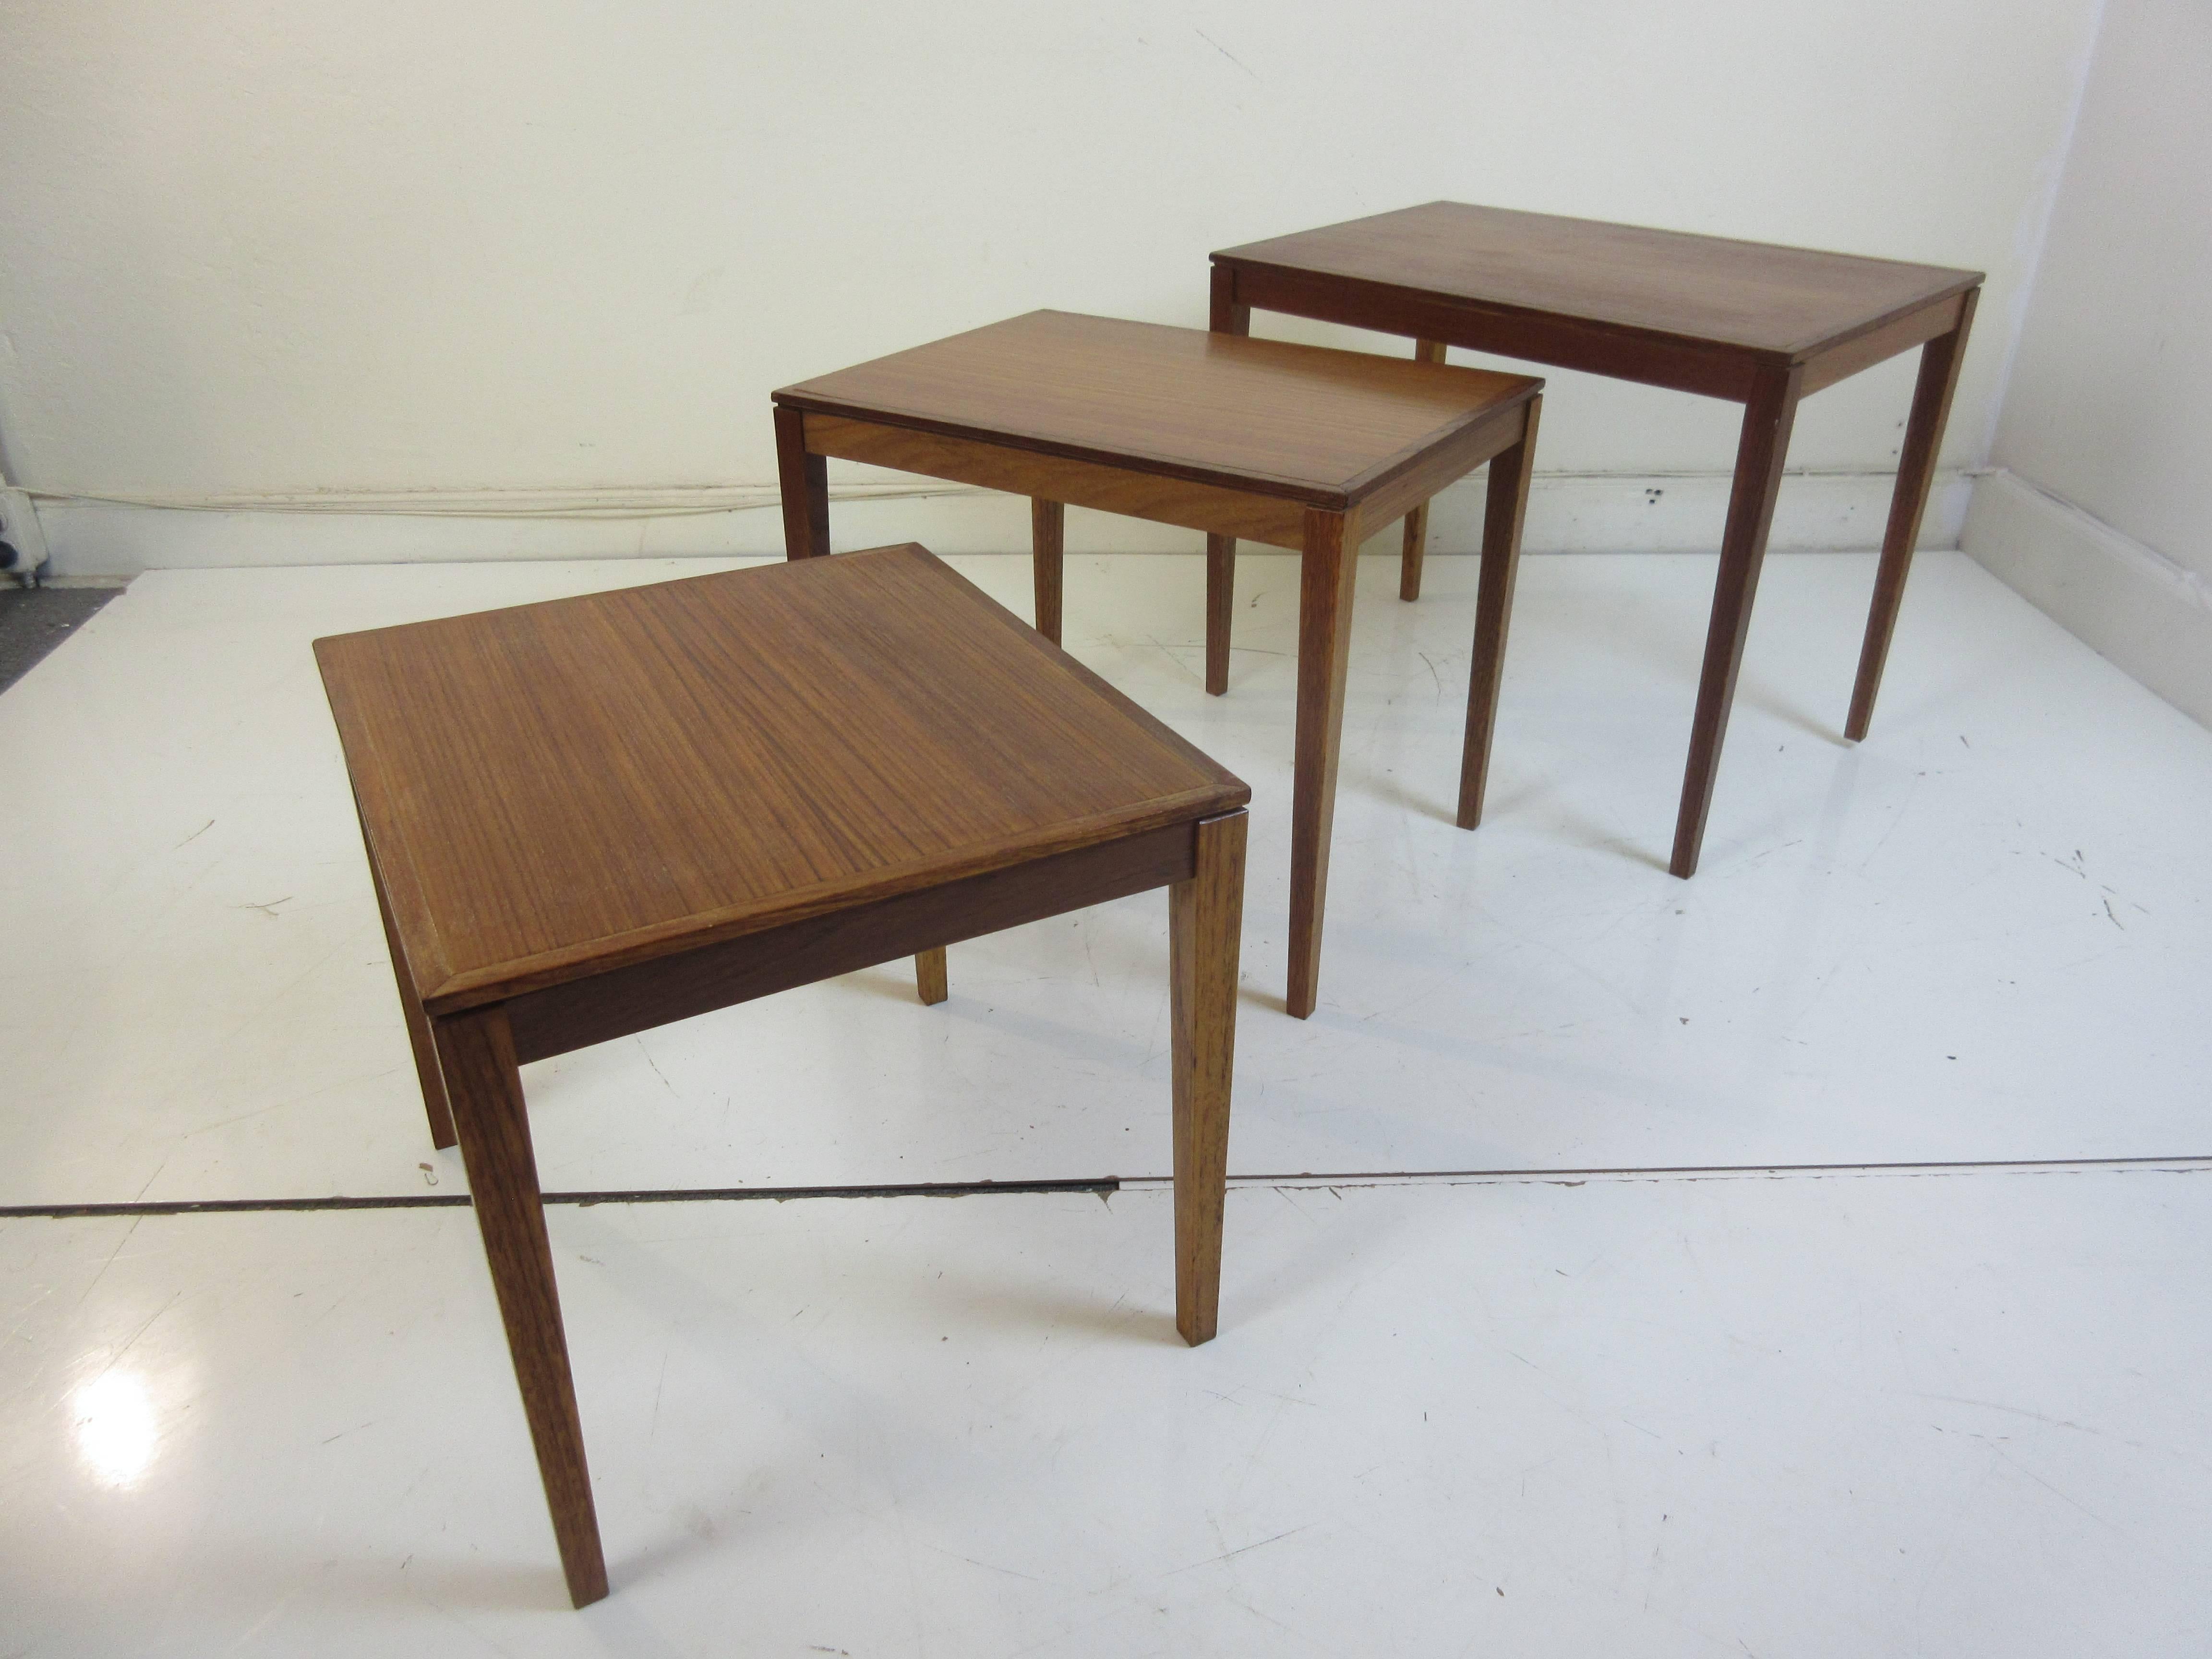 Danish teak nesting tables in three sizes with all fitting under the largest size. Legs are solid teak with a veneered top. Legs detach for easy shipping.